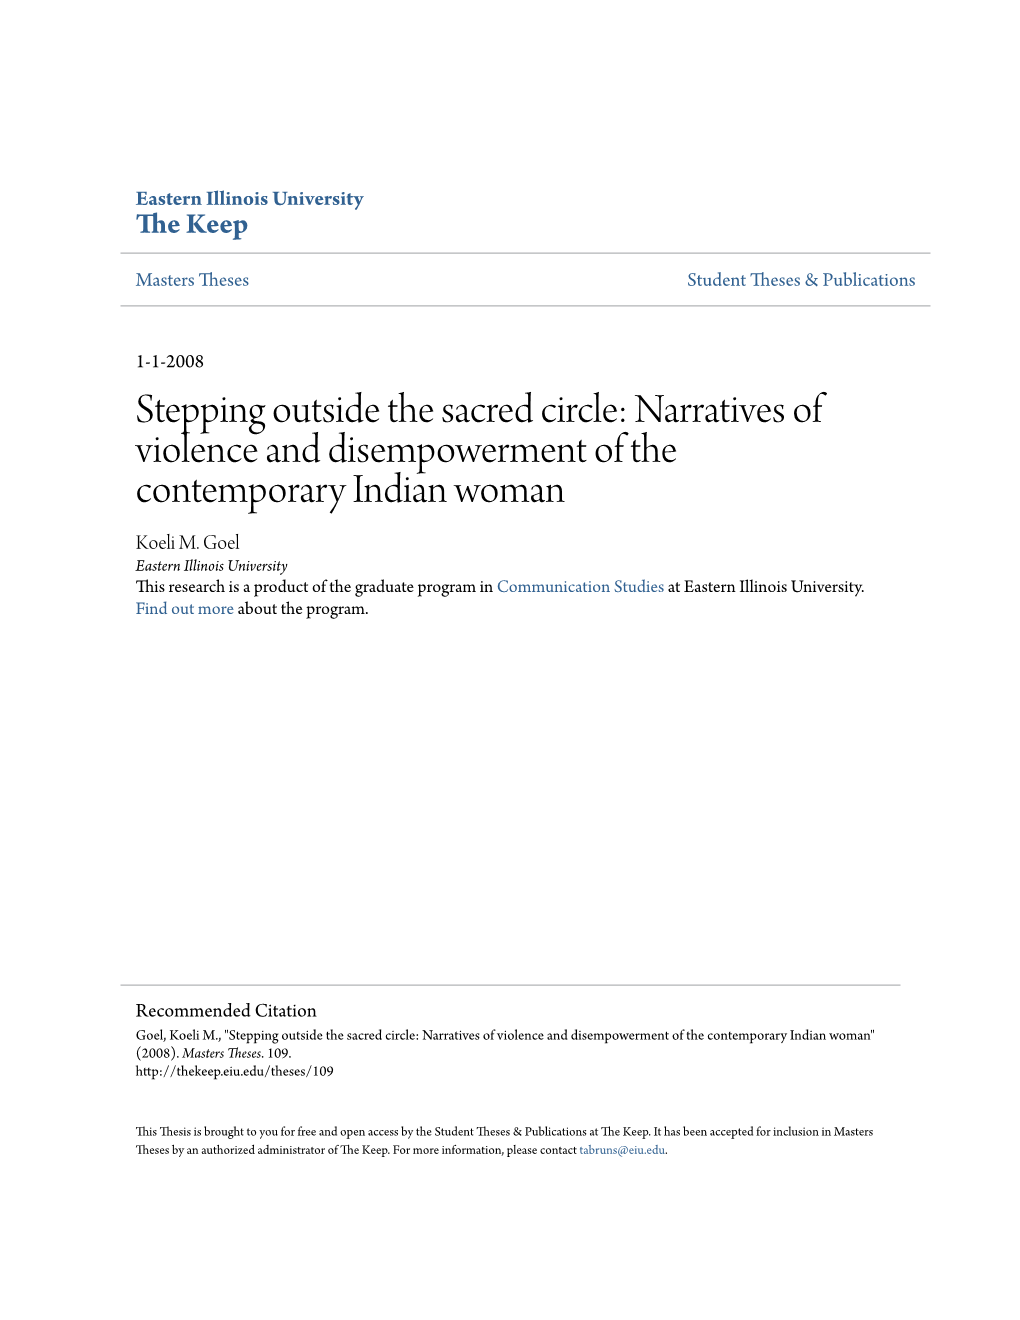 Stepping Outside the Sacred Circle: Narratives of Violence and Disempowerment of the Contemporary Indian Woman Koeli M